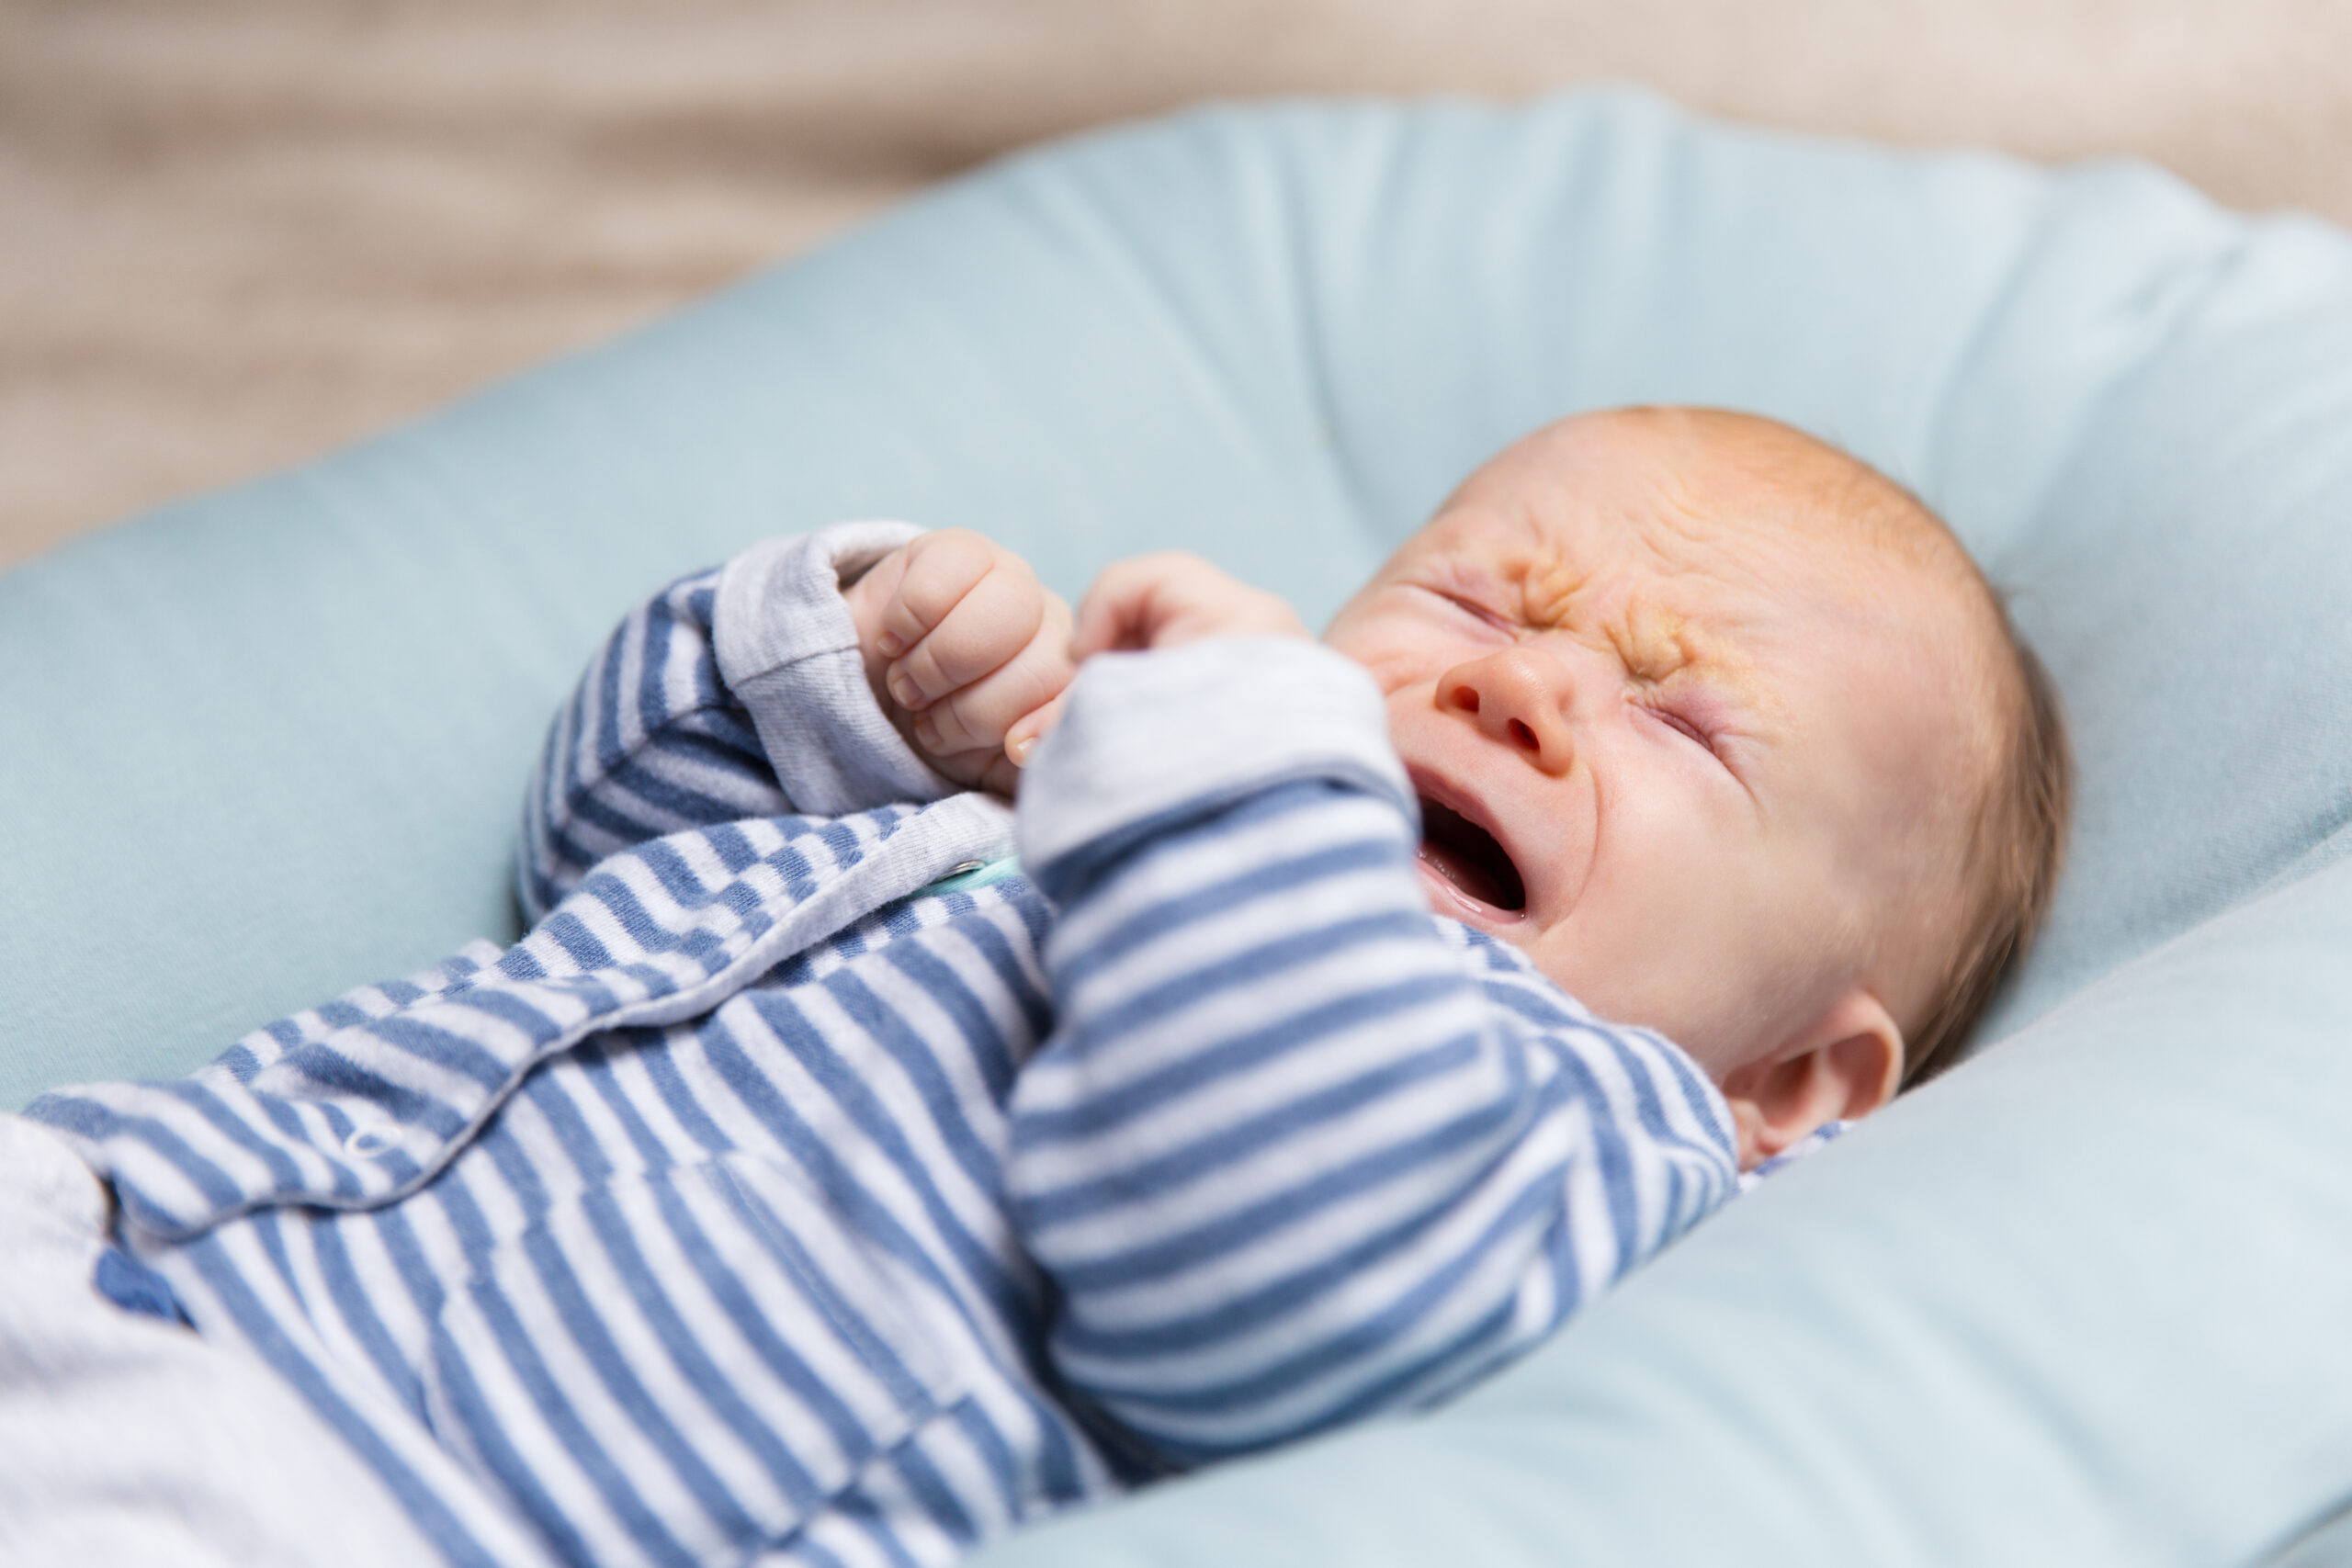 Bronchiolitis: What Is, Causes, Symptoms, Diagnosis, and Prevention